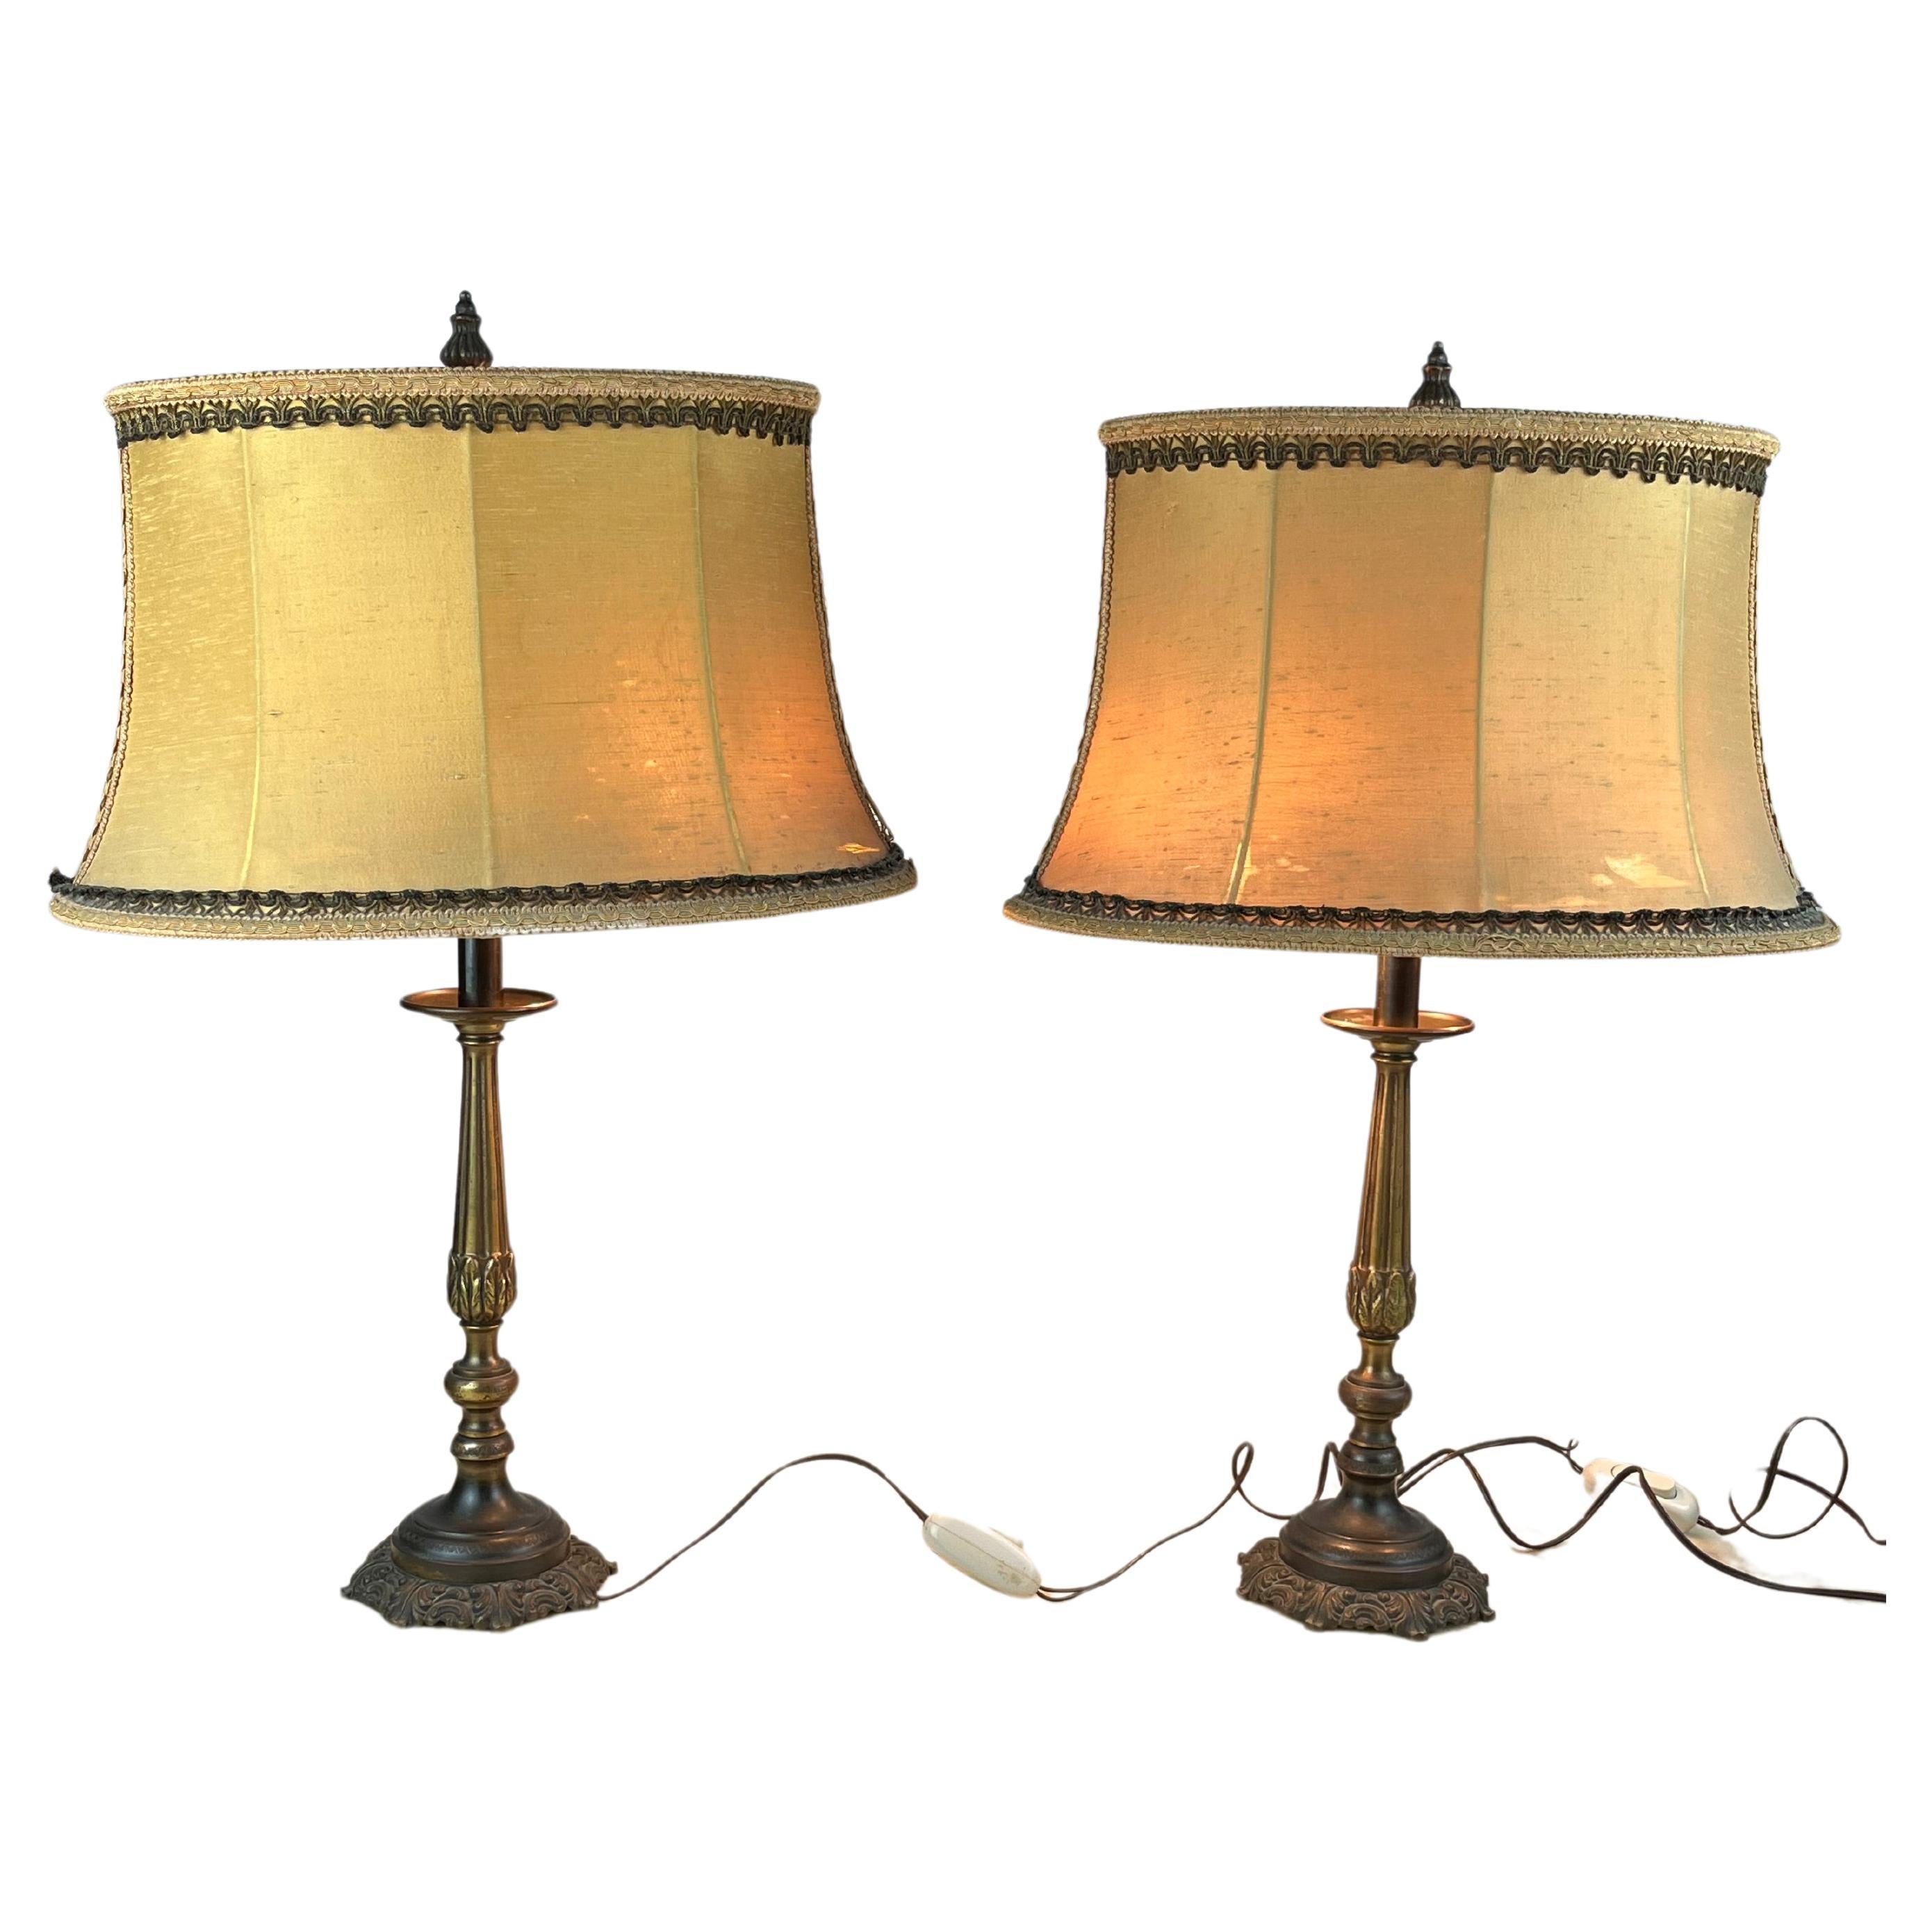 Pair of bronze table/bedside lamps, Italy, 1940s
The lamps are in good condition, the lampshades should be replaced.
They work with lamps and 27.

We guarantee adequate packaging and will ship via DHL, insuring the contents against any breakage or